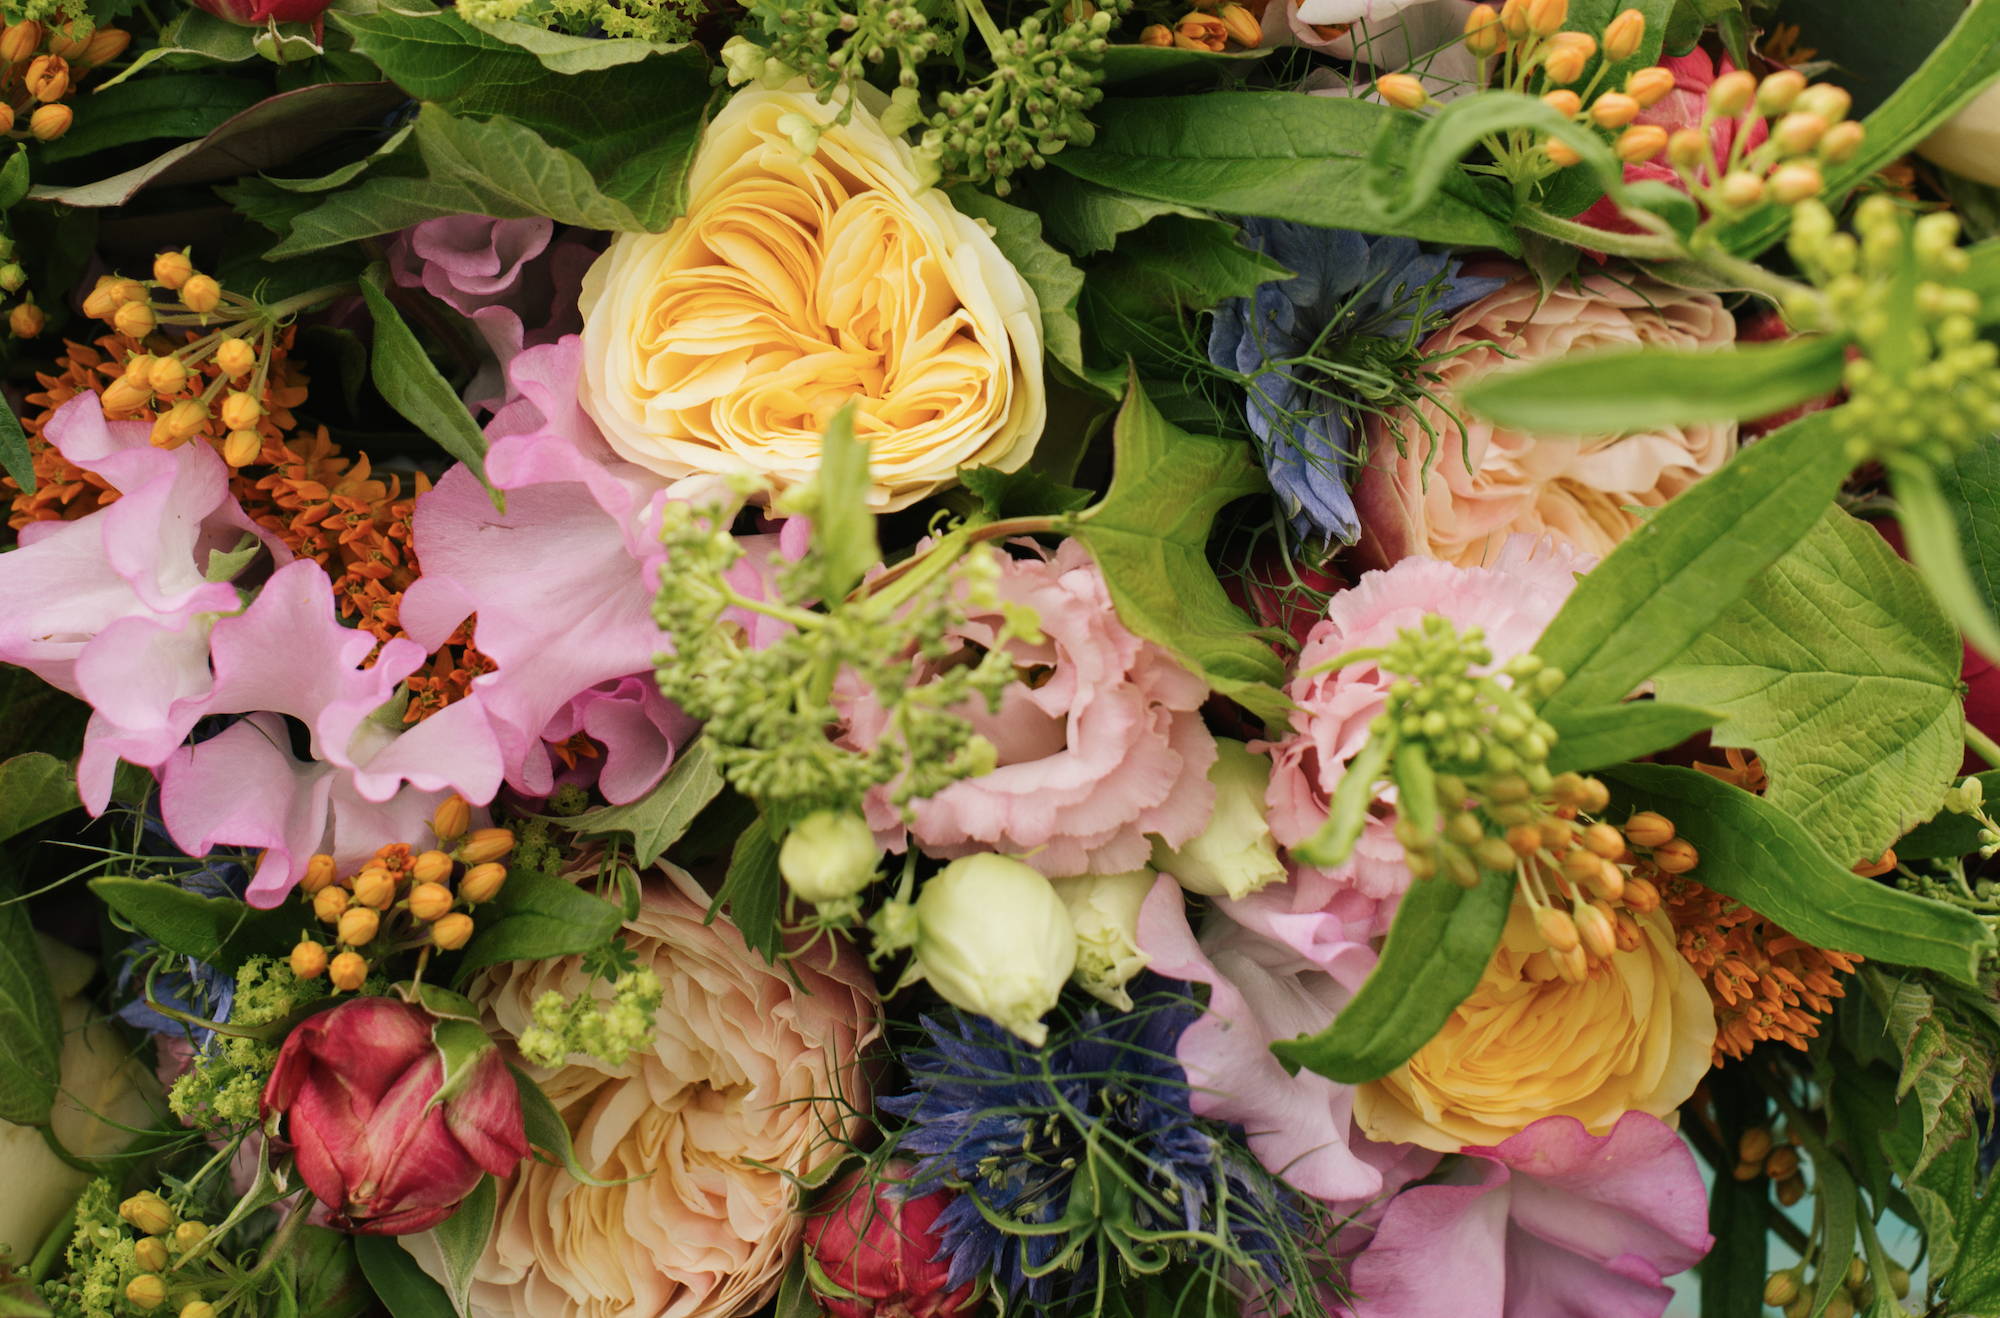 Wild at Heart Foundation Bouquet, featuring vuvuzela roses, lisianthus and clematis